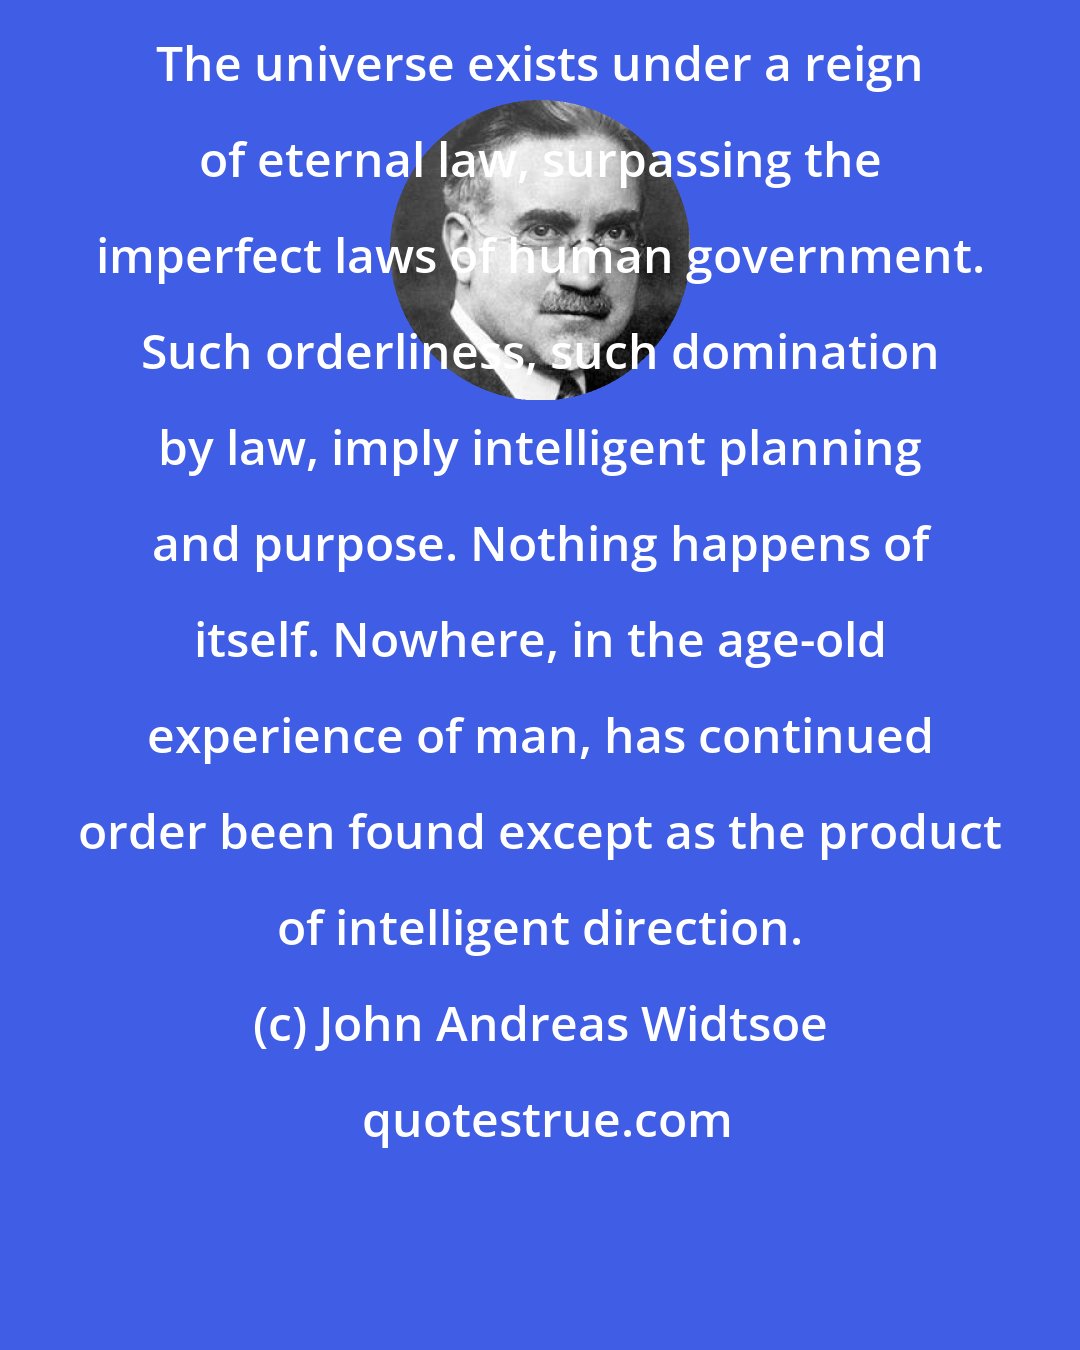 John Andreas Widtsoe: The universe exists under a reign of eternal law, surpassing the imperfect laws of human government. Such orderliness, such domination by law, imply intelligent planning and purpose. Nothing happens of itself. Nowhere, in the age-old experience of man, has continued order been found except as the product of intelligent direction.